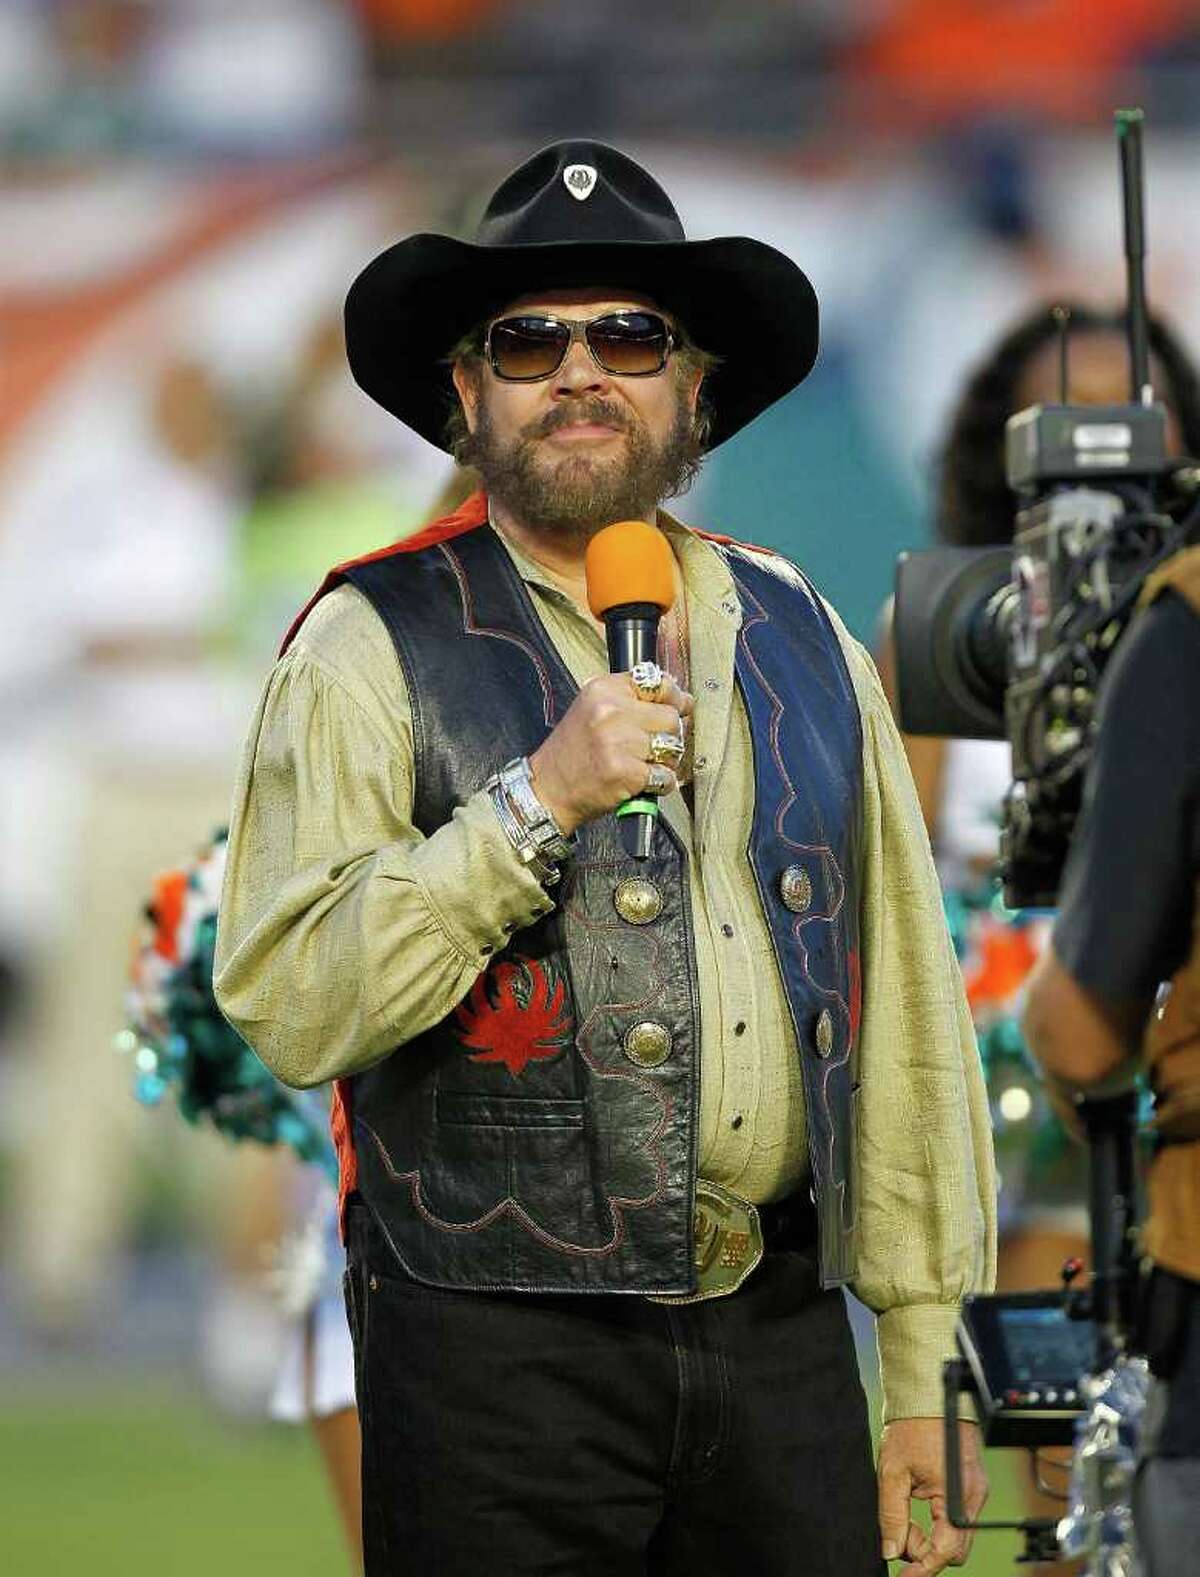 Celebrities' controversial remarks about Hitler Hank Williams' Monday Night Football song was pulled from ESPN after he said President Obama's golf outing with John Boehner was "like Hitler playing golf with (Israeli Prime Minister Benjamin) Netanyahu." Keep clicking to see other strange comments celebrities have made about Adolf Hitler.